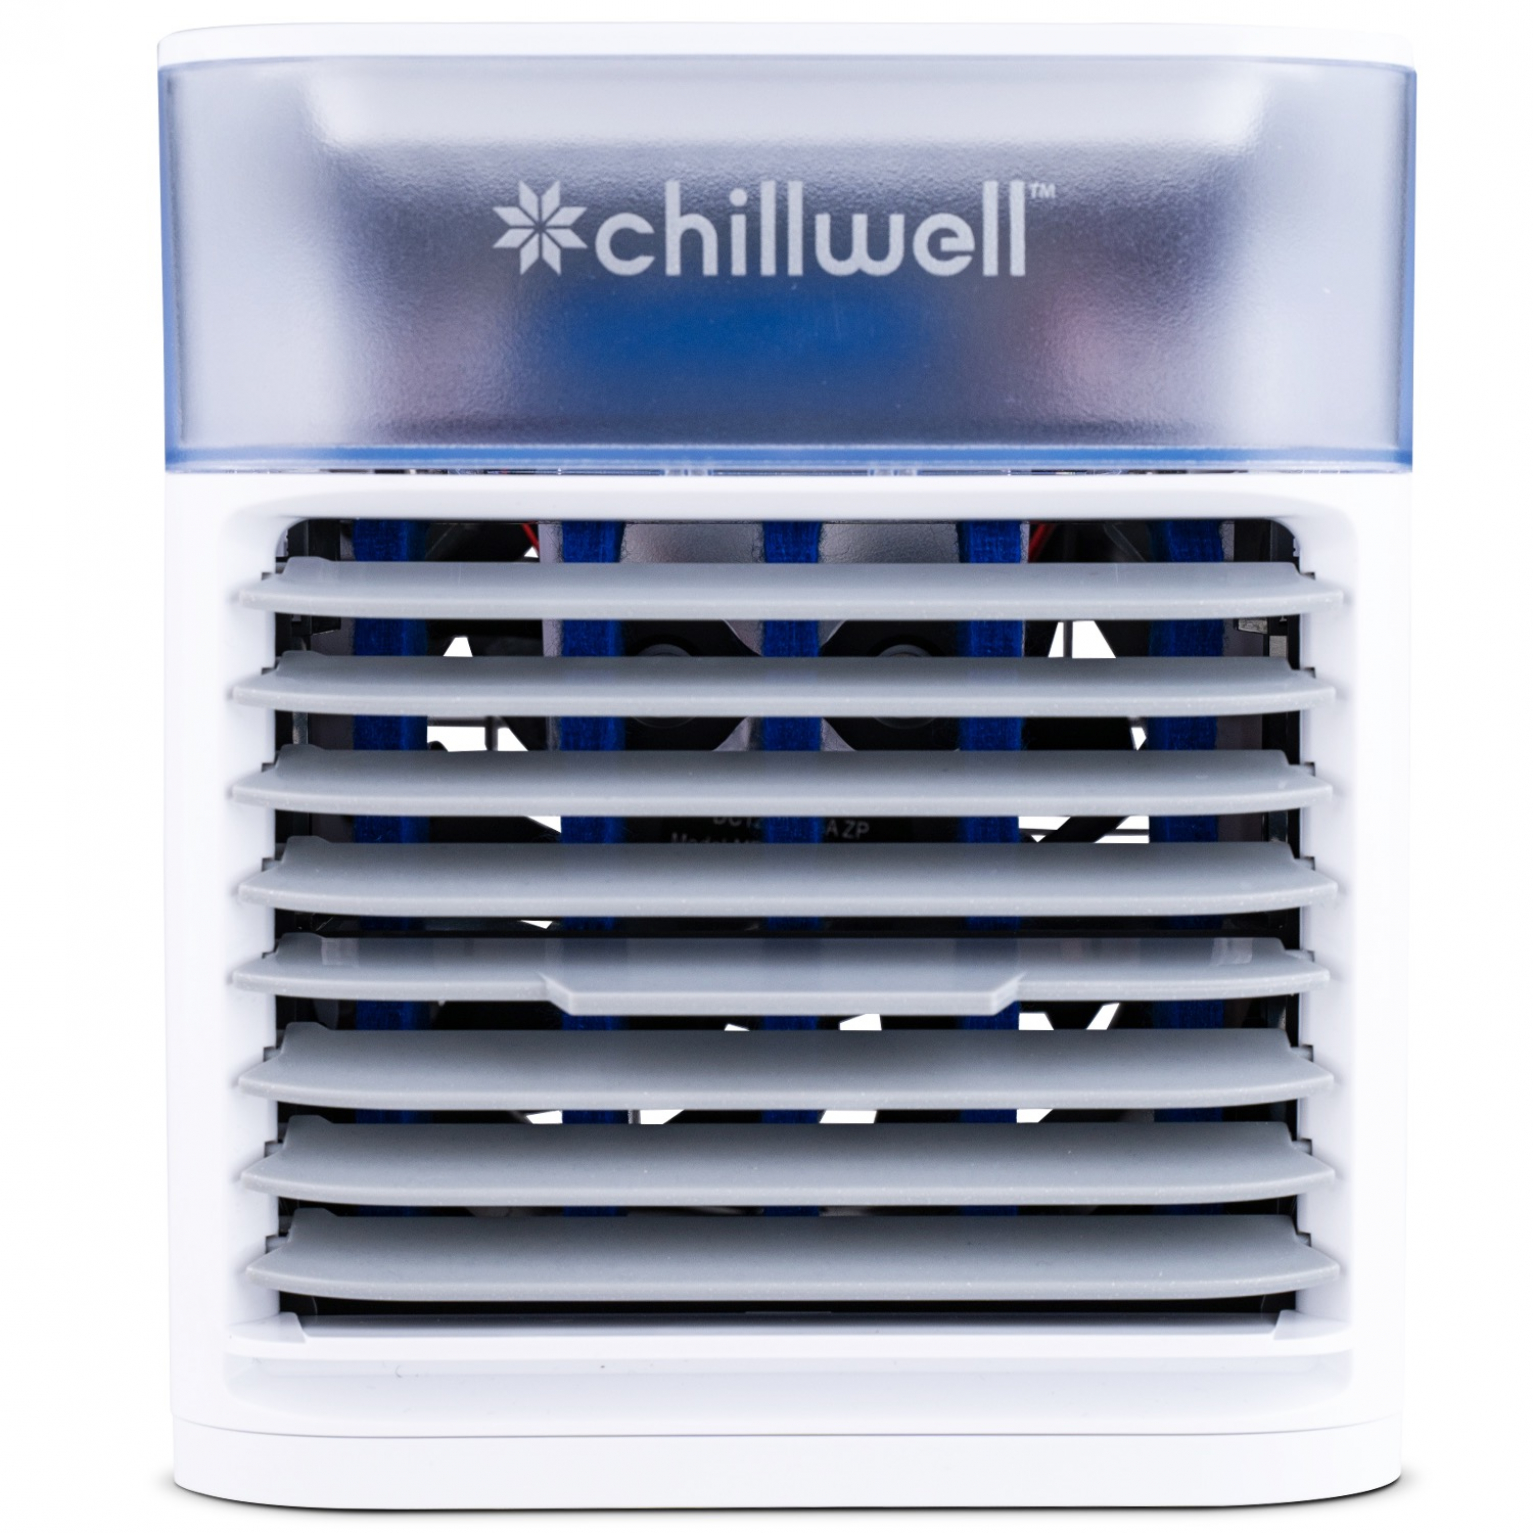 Do Chillwell Ac Really Work